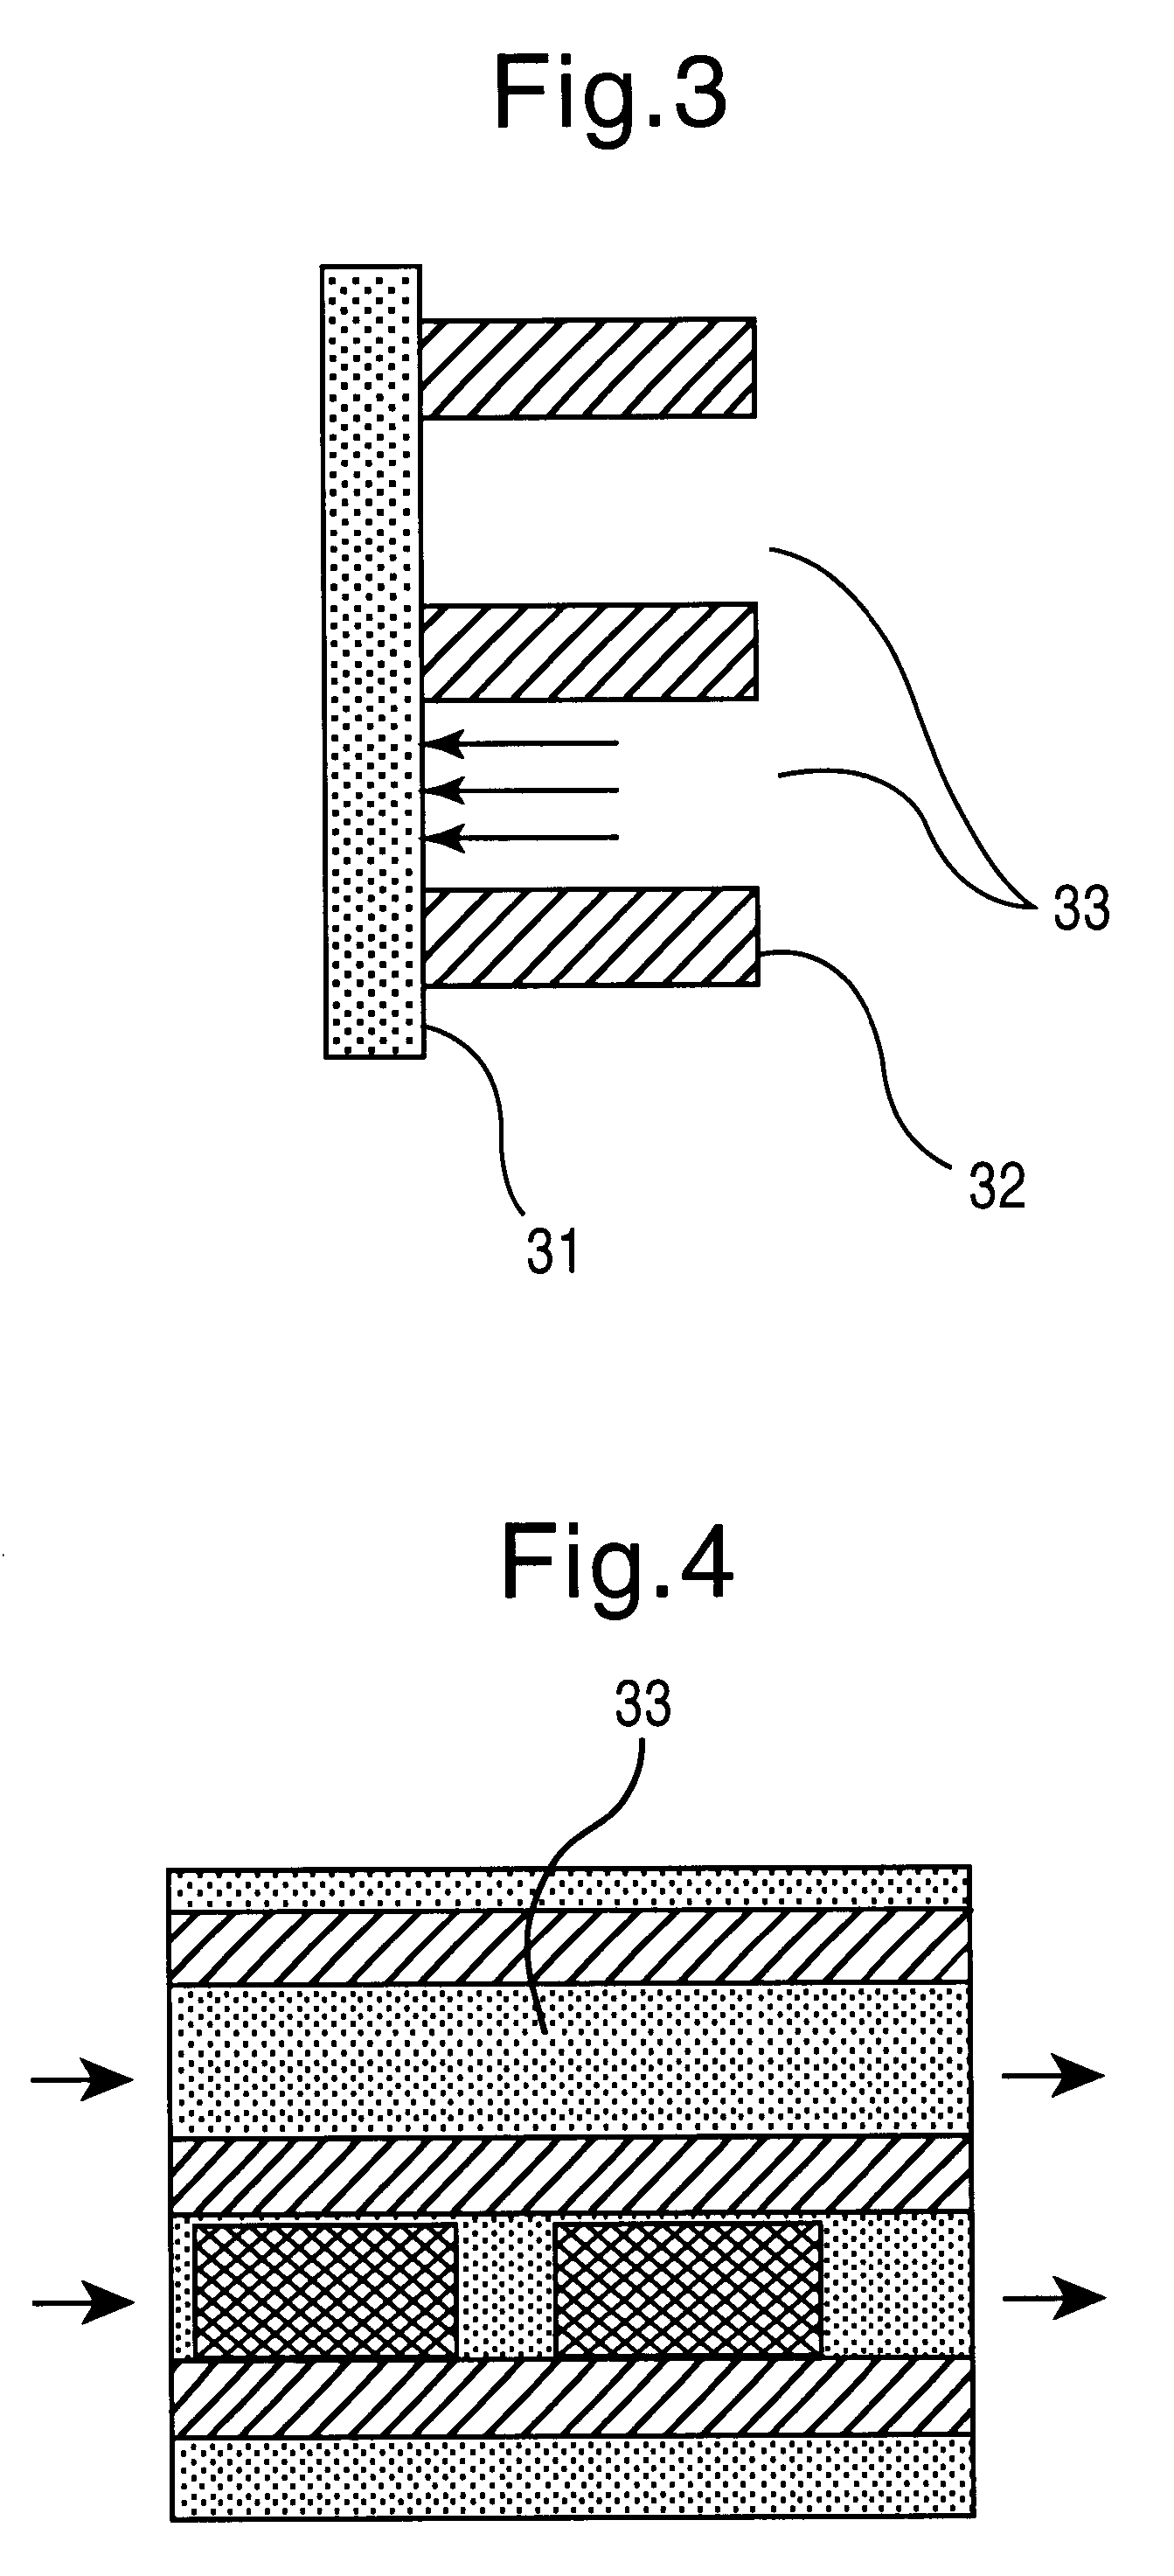 Method for producing polymers